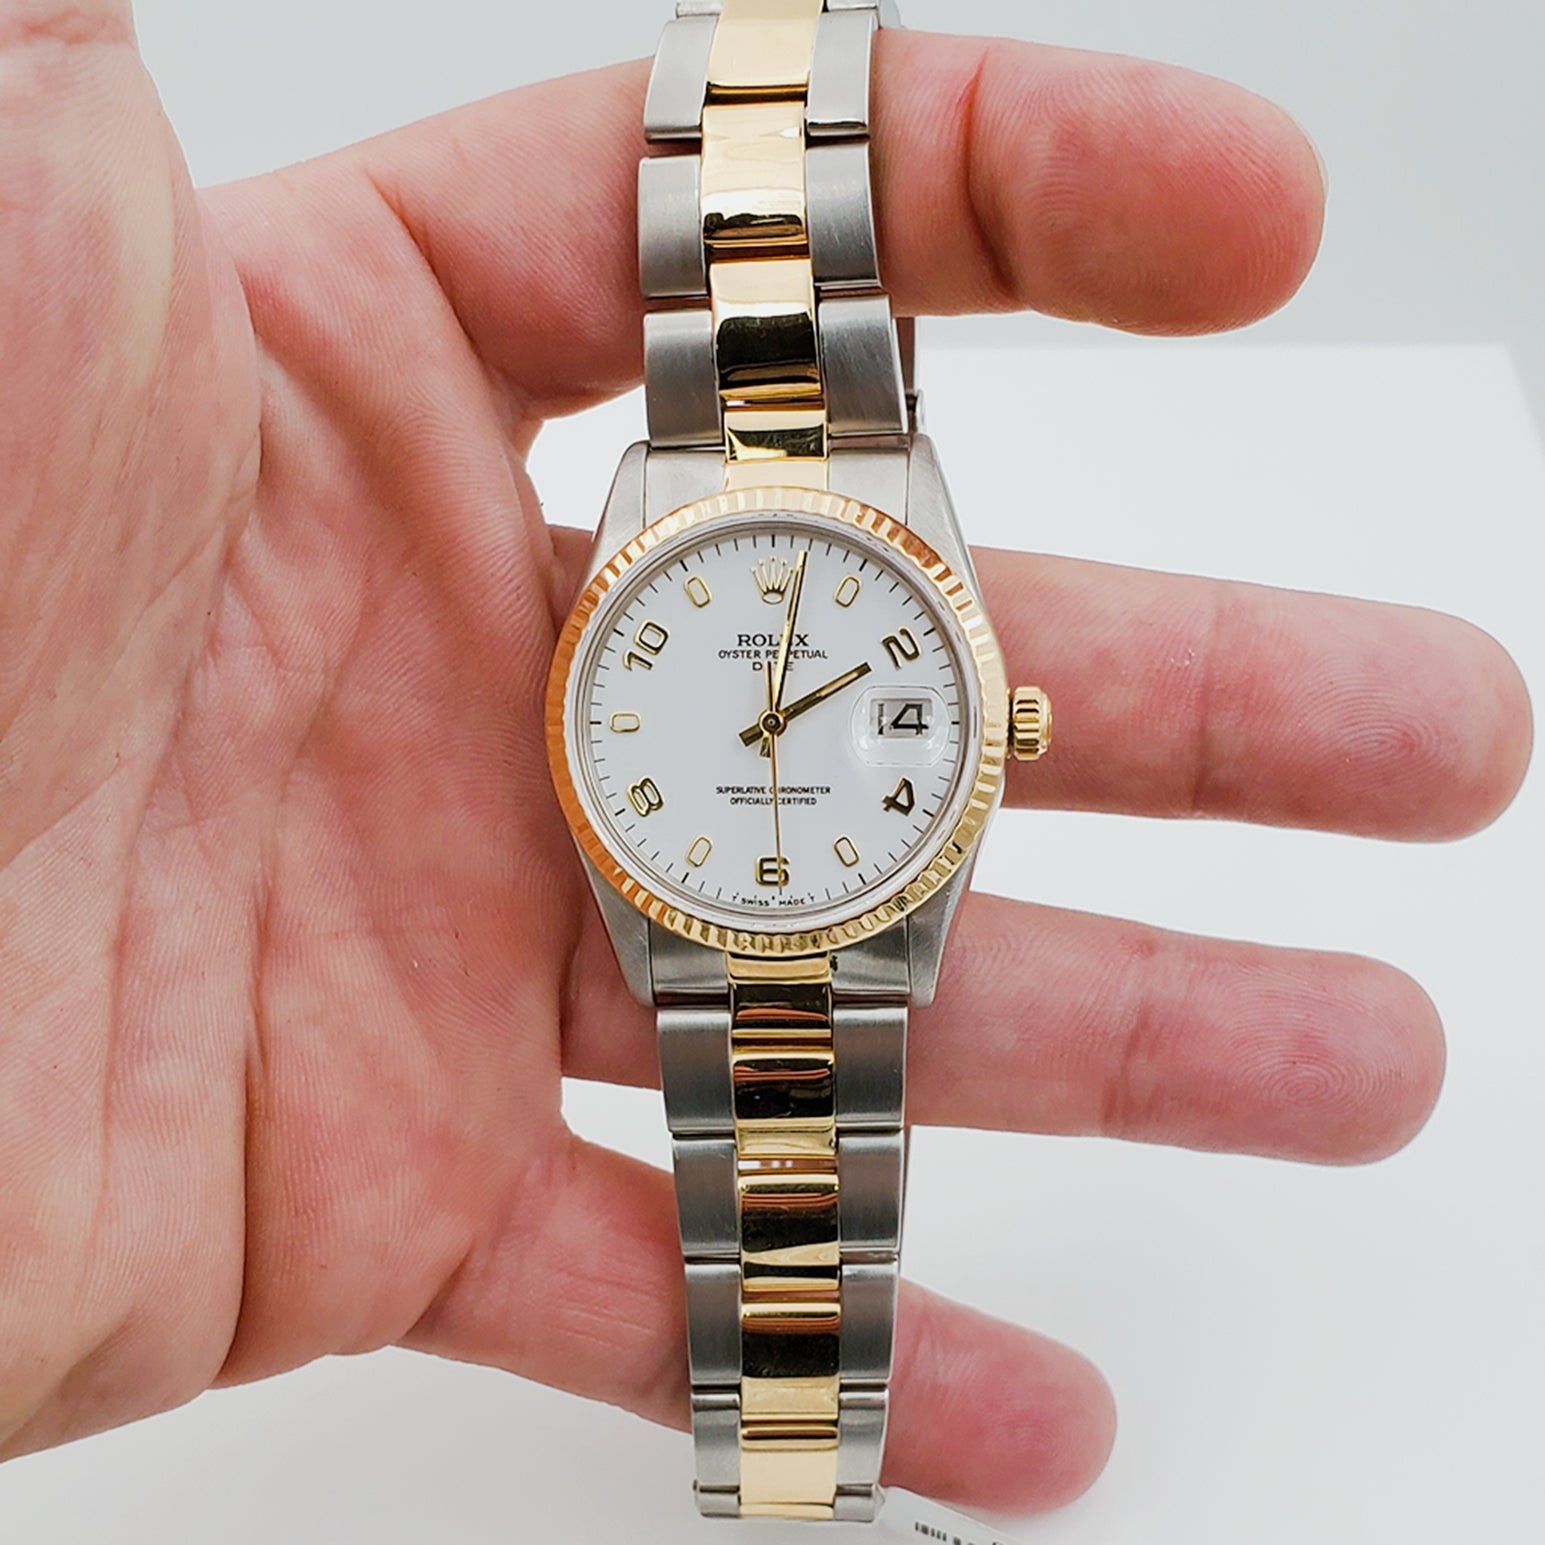 Unisex Rolex DateJust 34mm Two Tone 18k Gold / Stainless Steel Oyster Band Watch with White Dial, Gold Numeral and Fluted Bezel. (Pre-Owned)